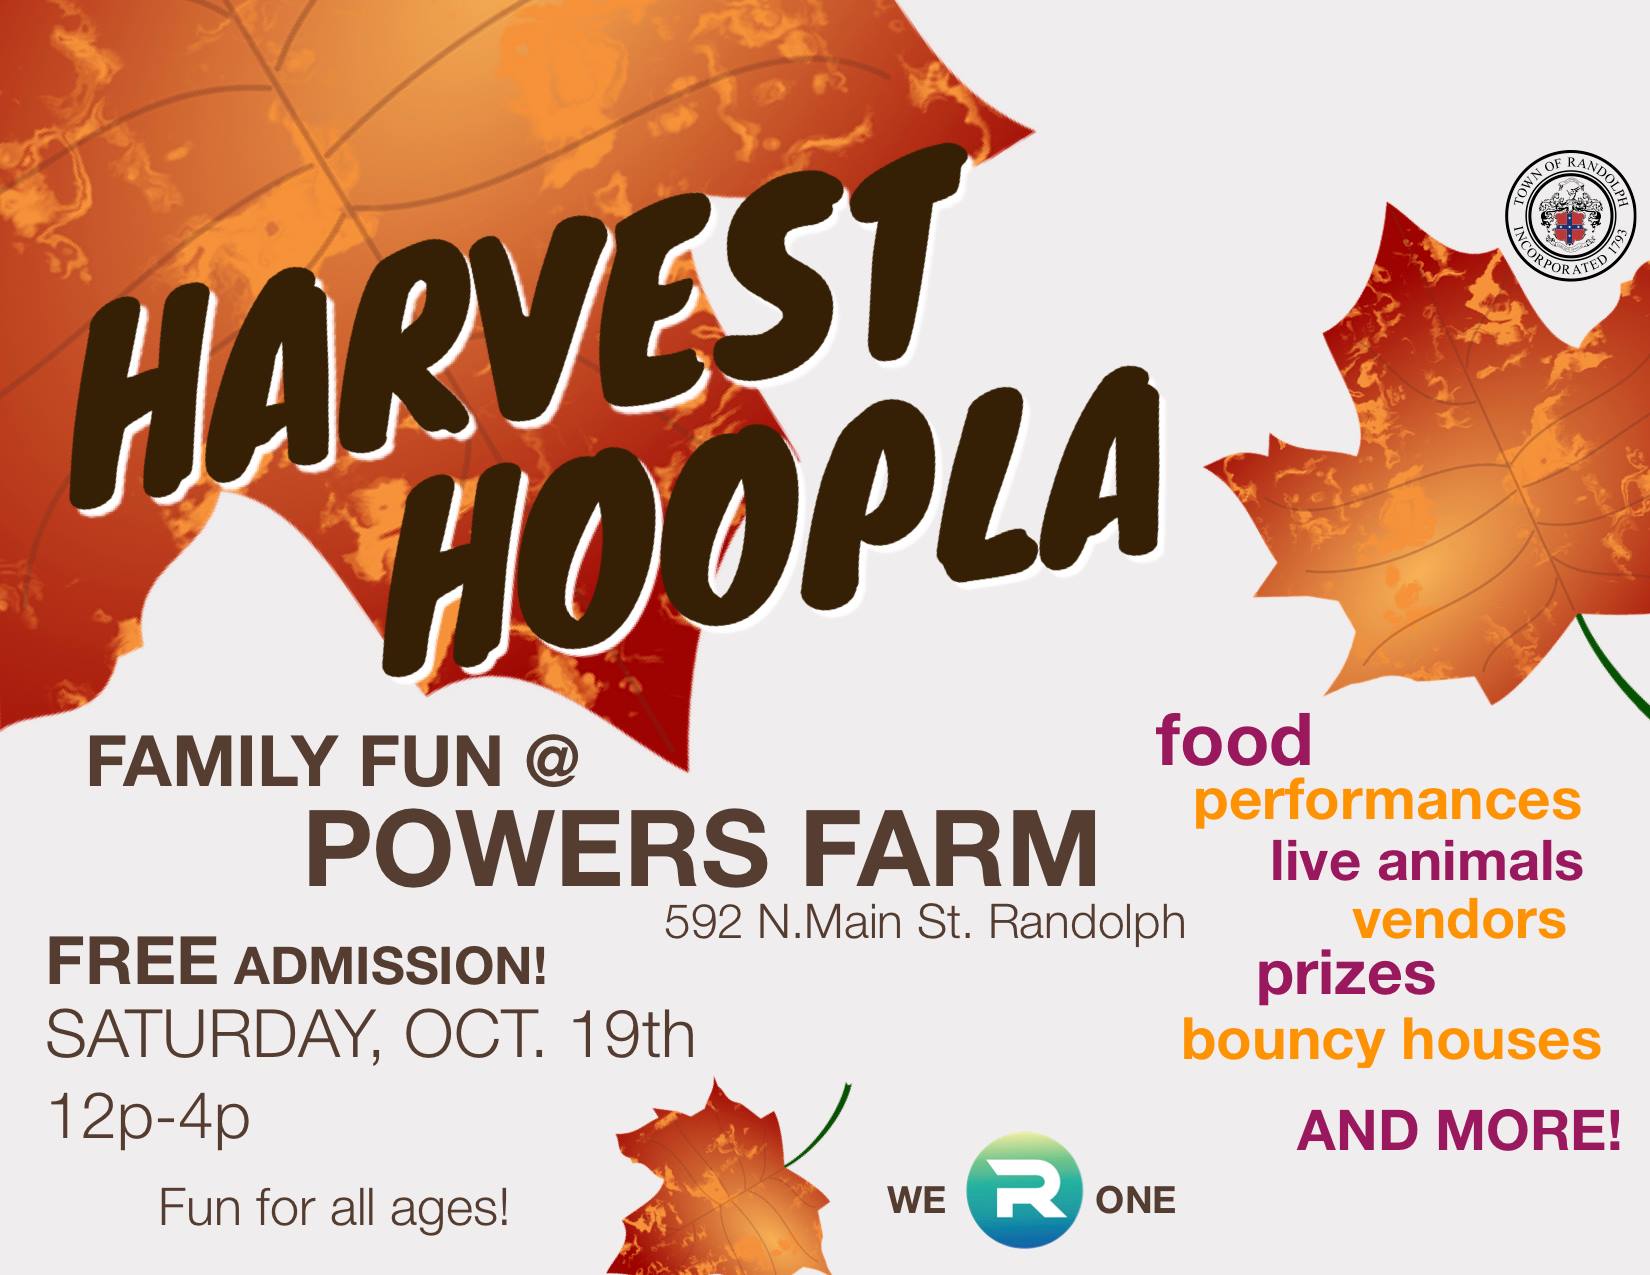 Powers Farm Harvest Hoopla 2019 Randolph MA 365 things to do in South